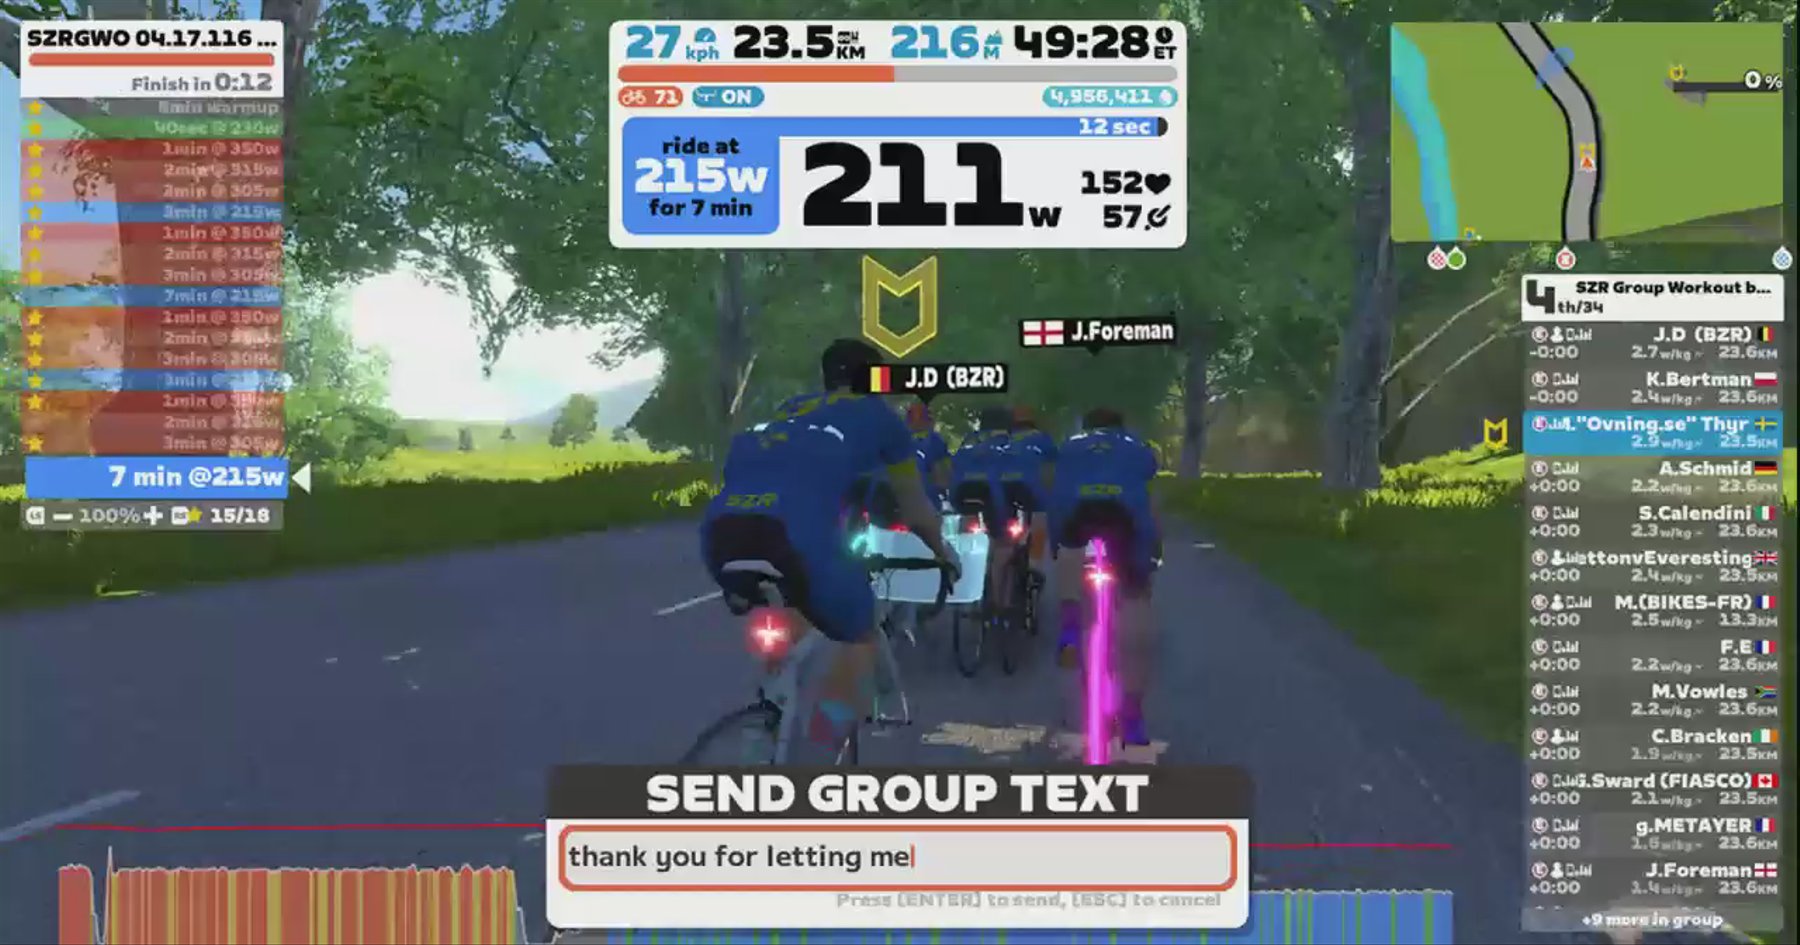 Zwift - Group Workout: SZR Group Workout by Thyr ** (E) on Tire-Bouchon in France